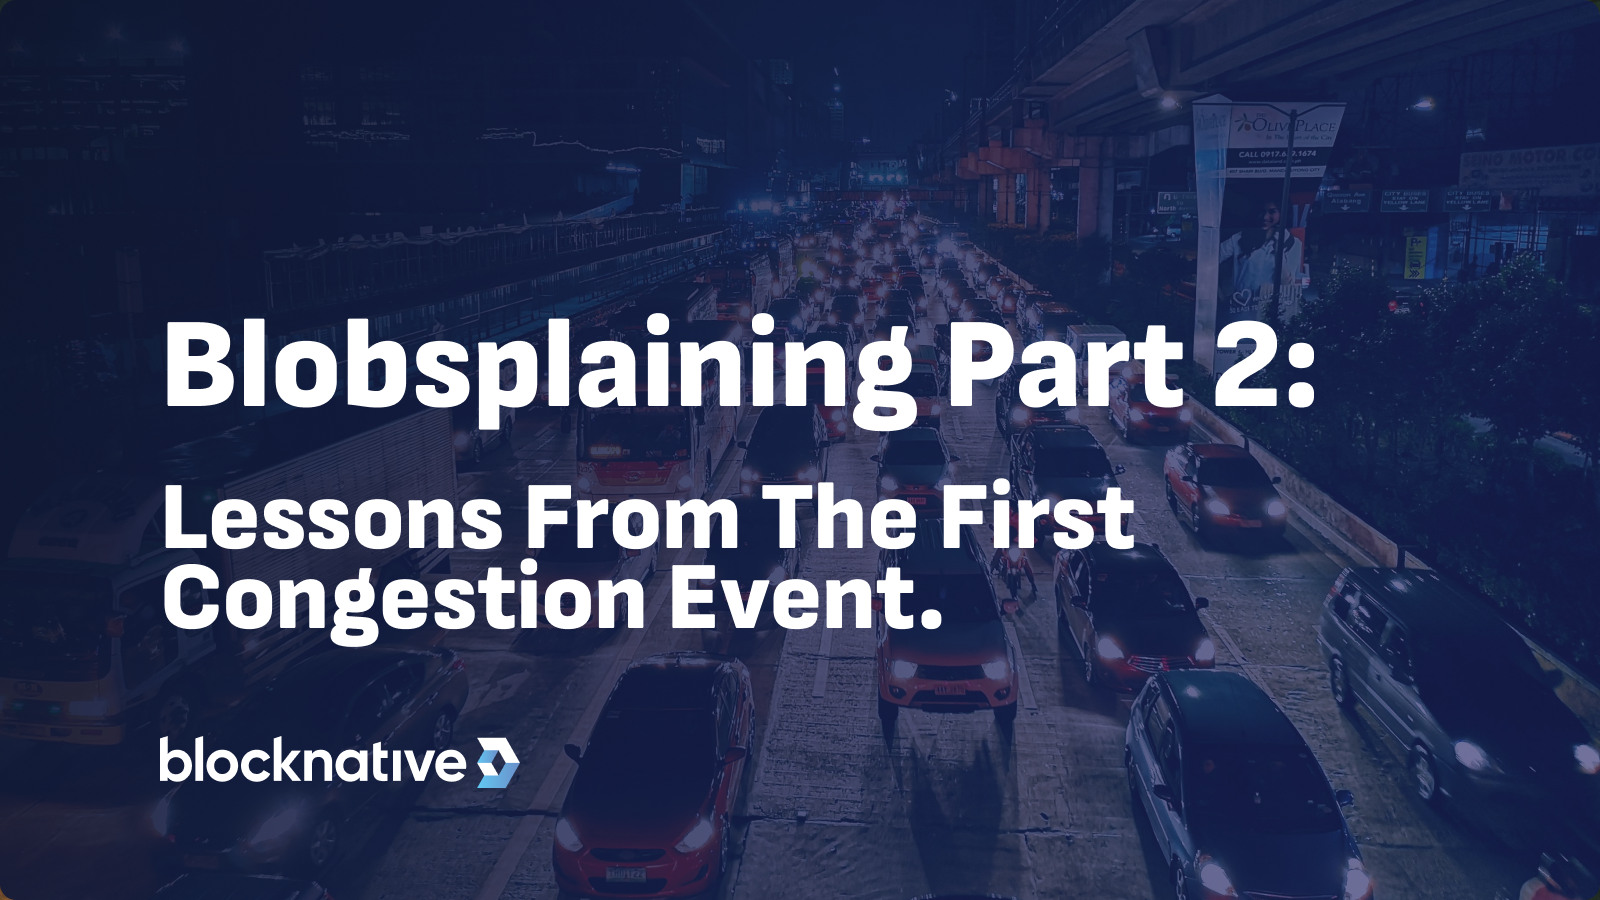 blobsplaining-part-2:-lessons-from-the-first-eip-4844-congestion-event